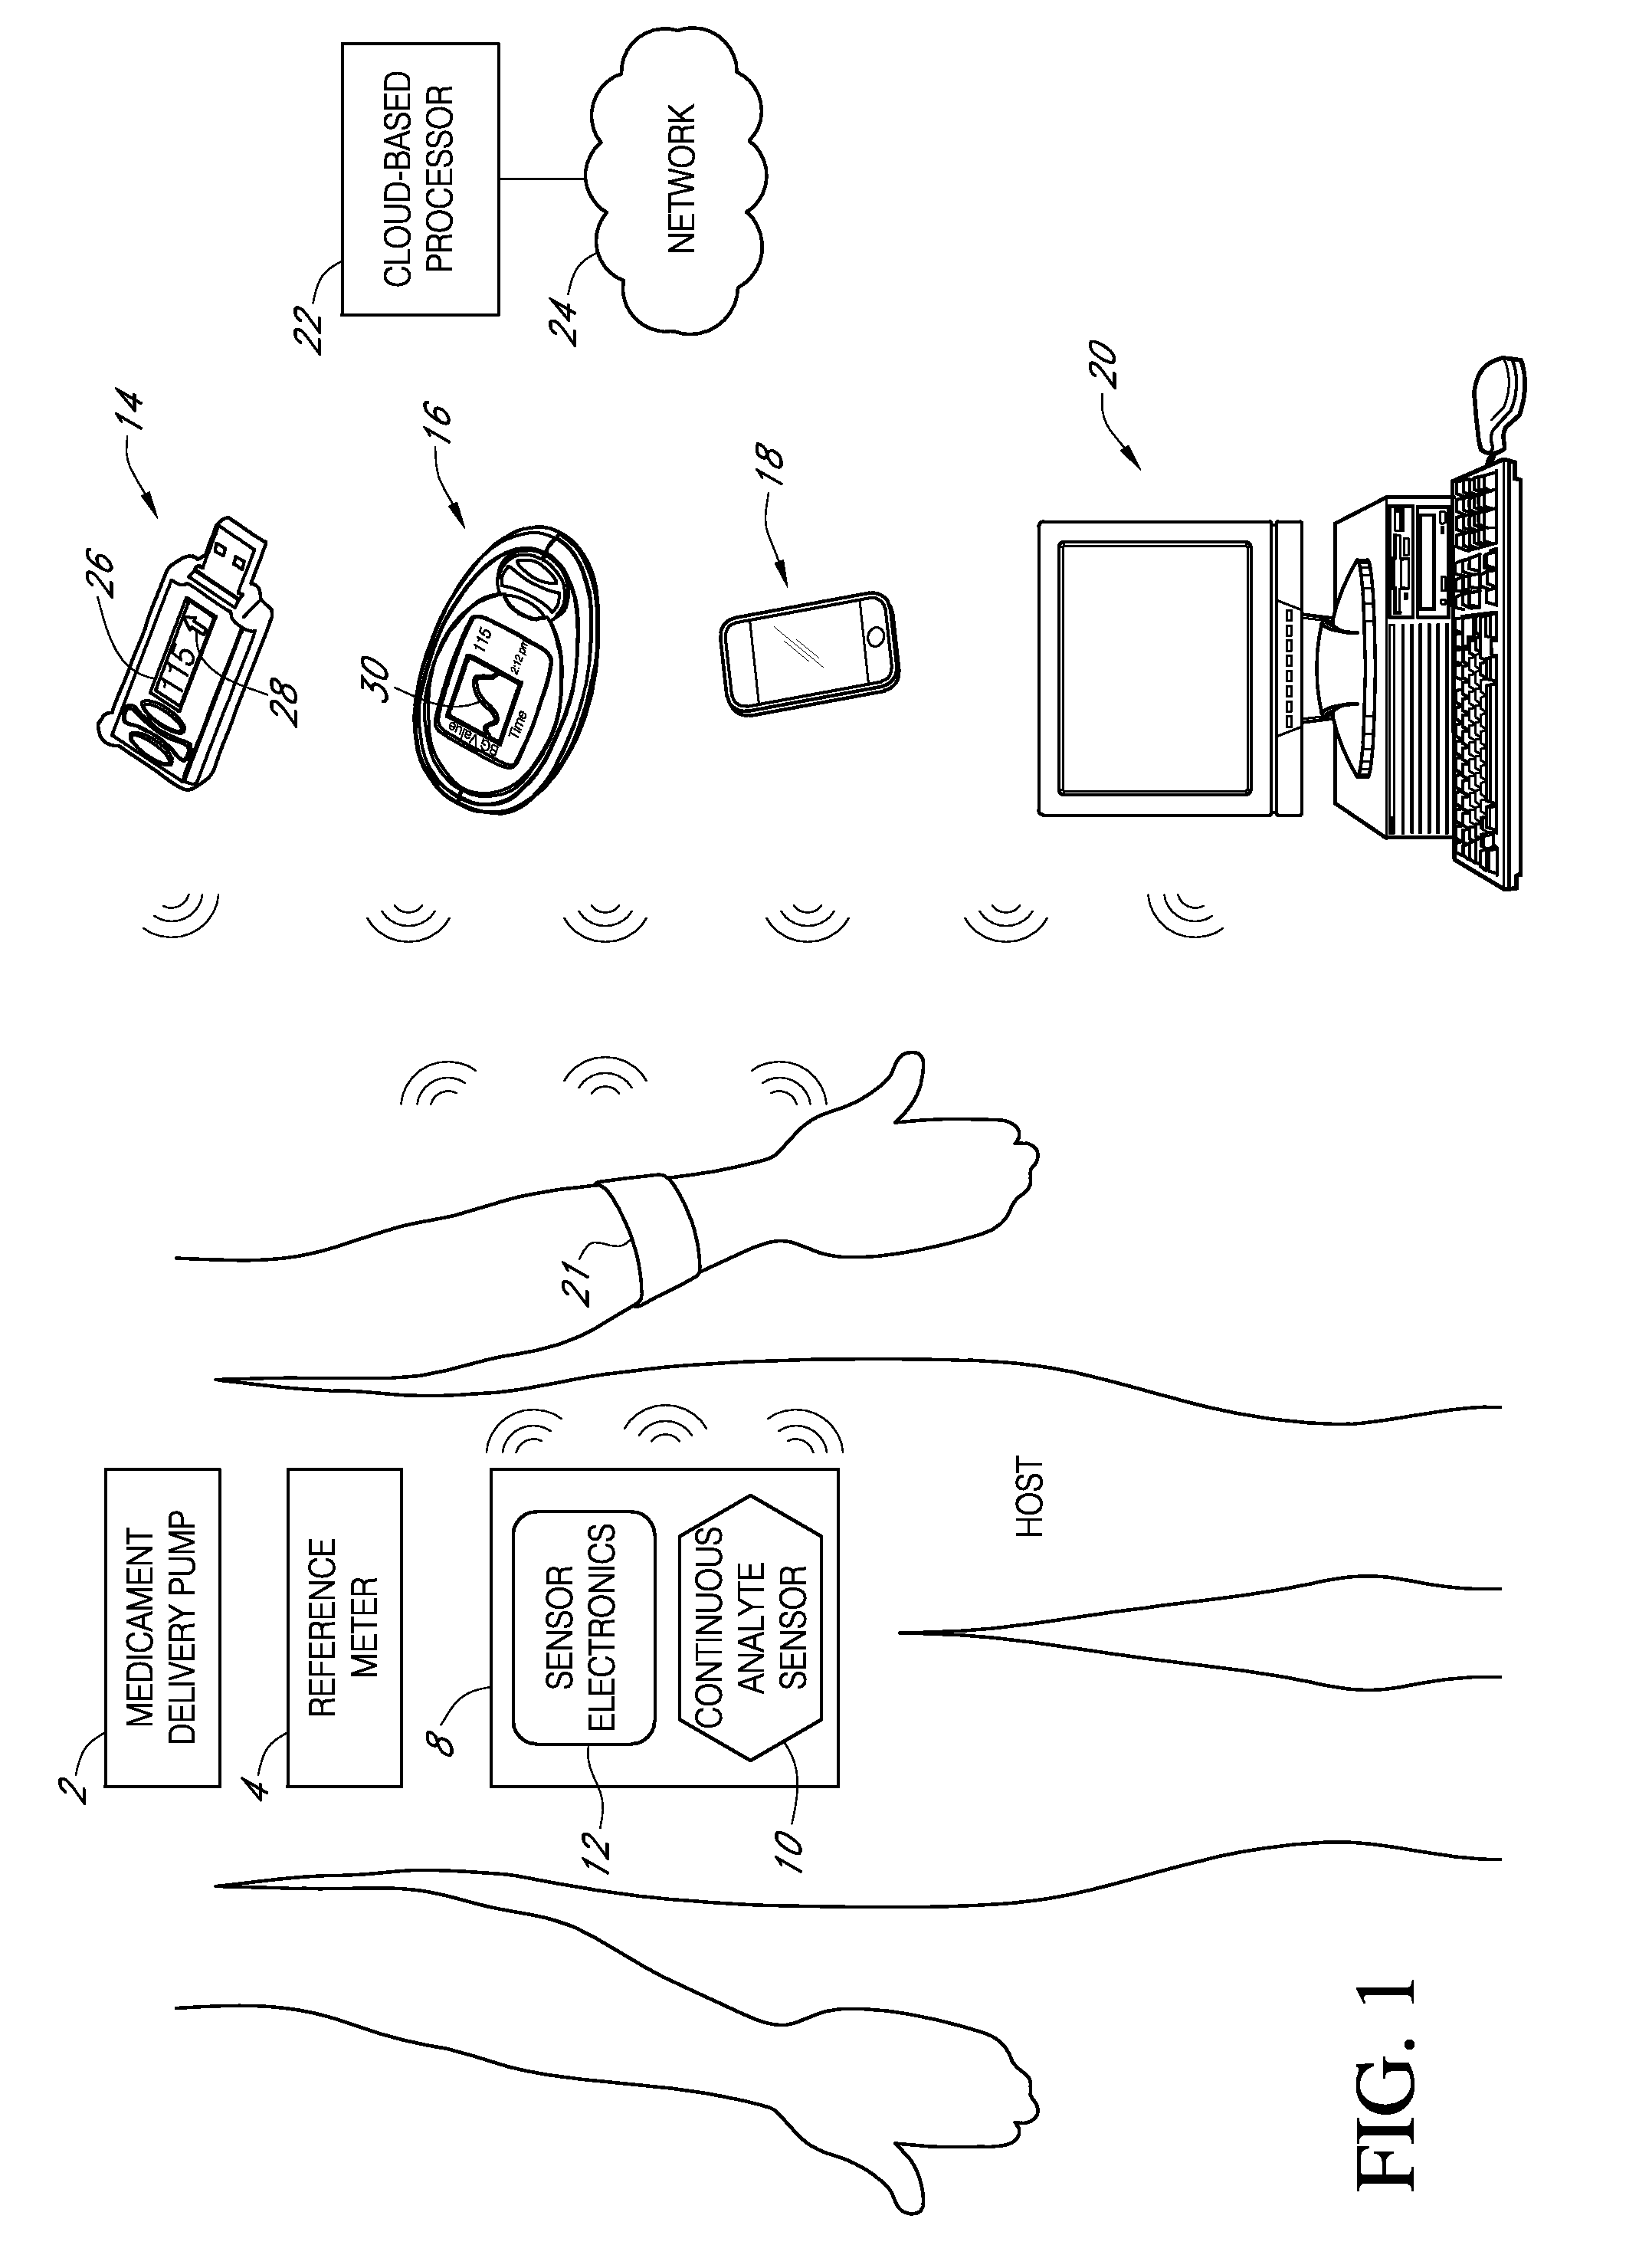 Adaptive interface for continuous monitoring devices